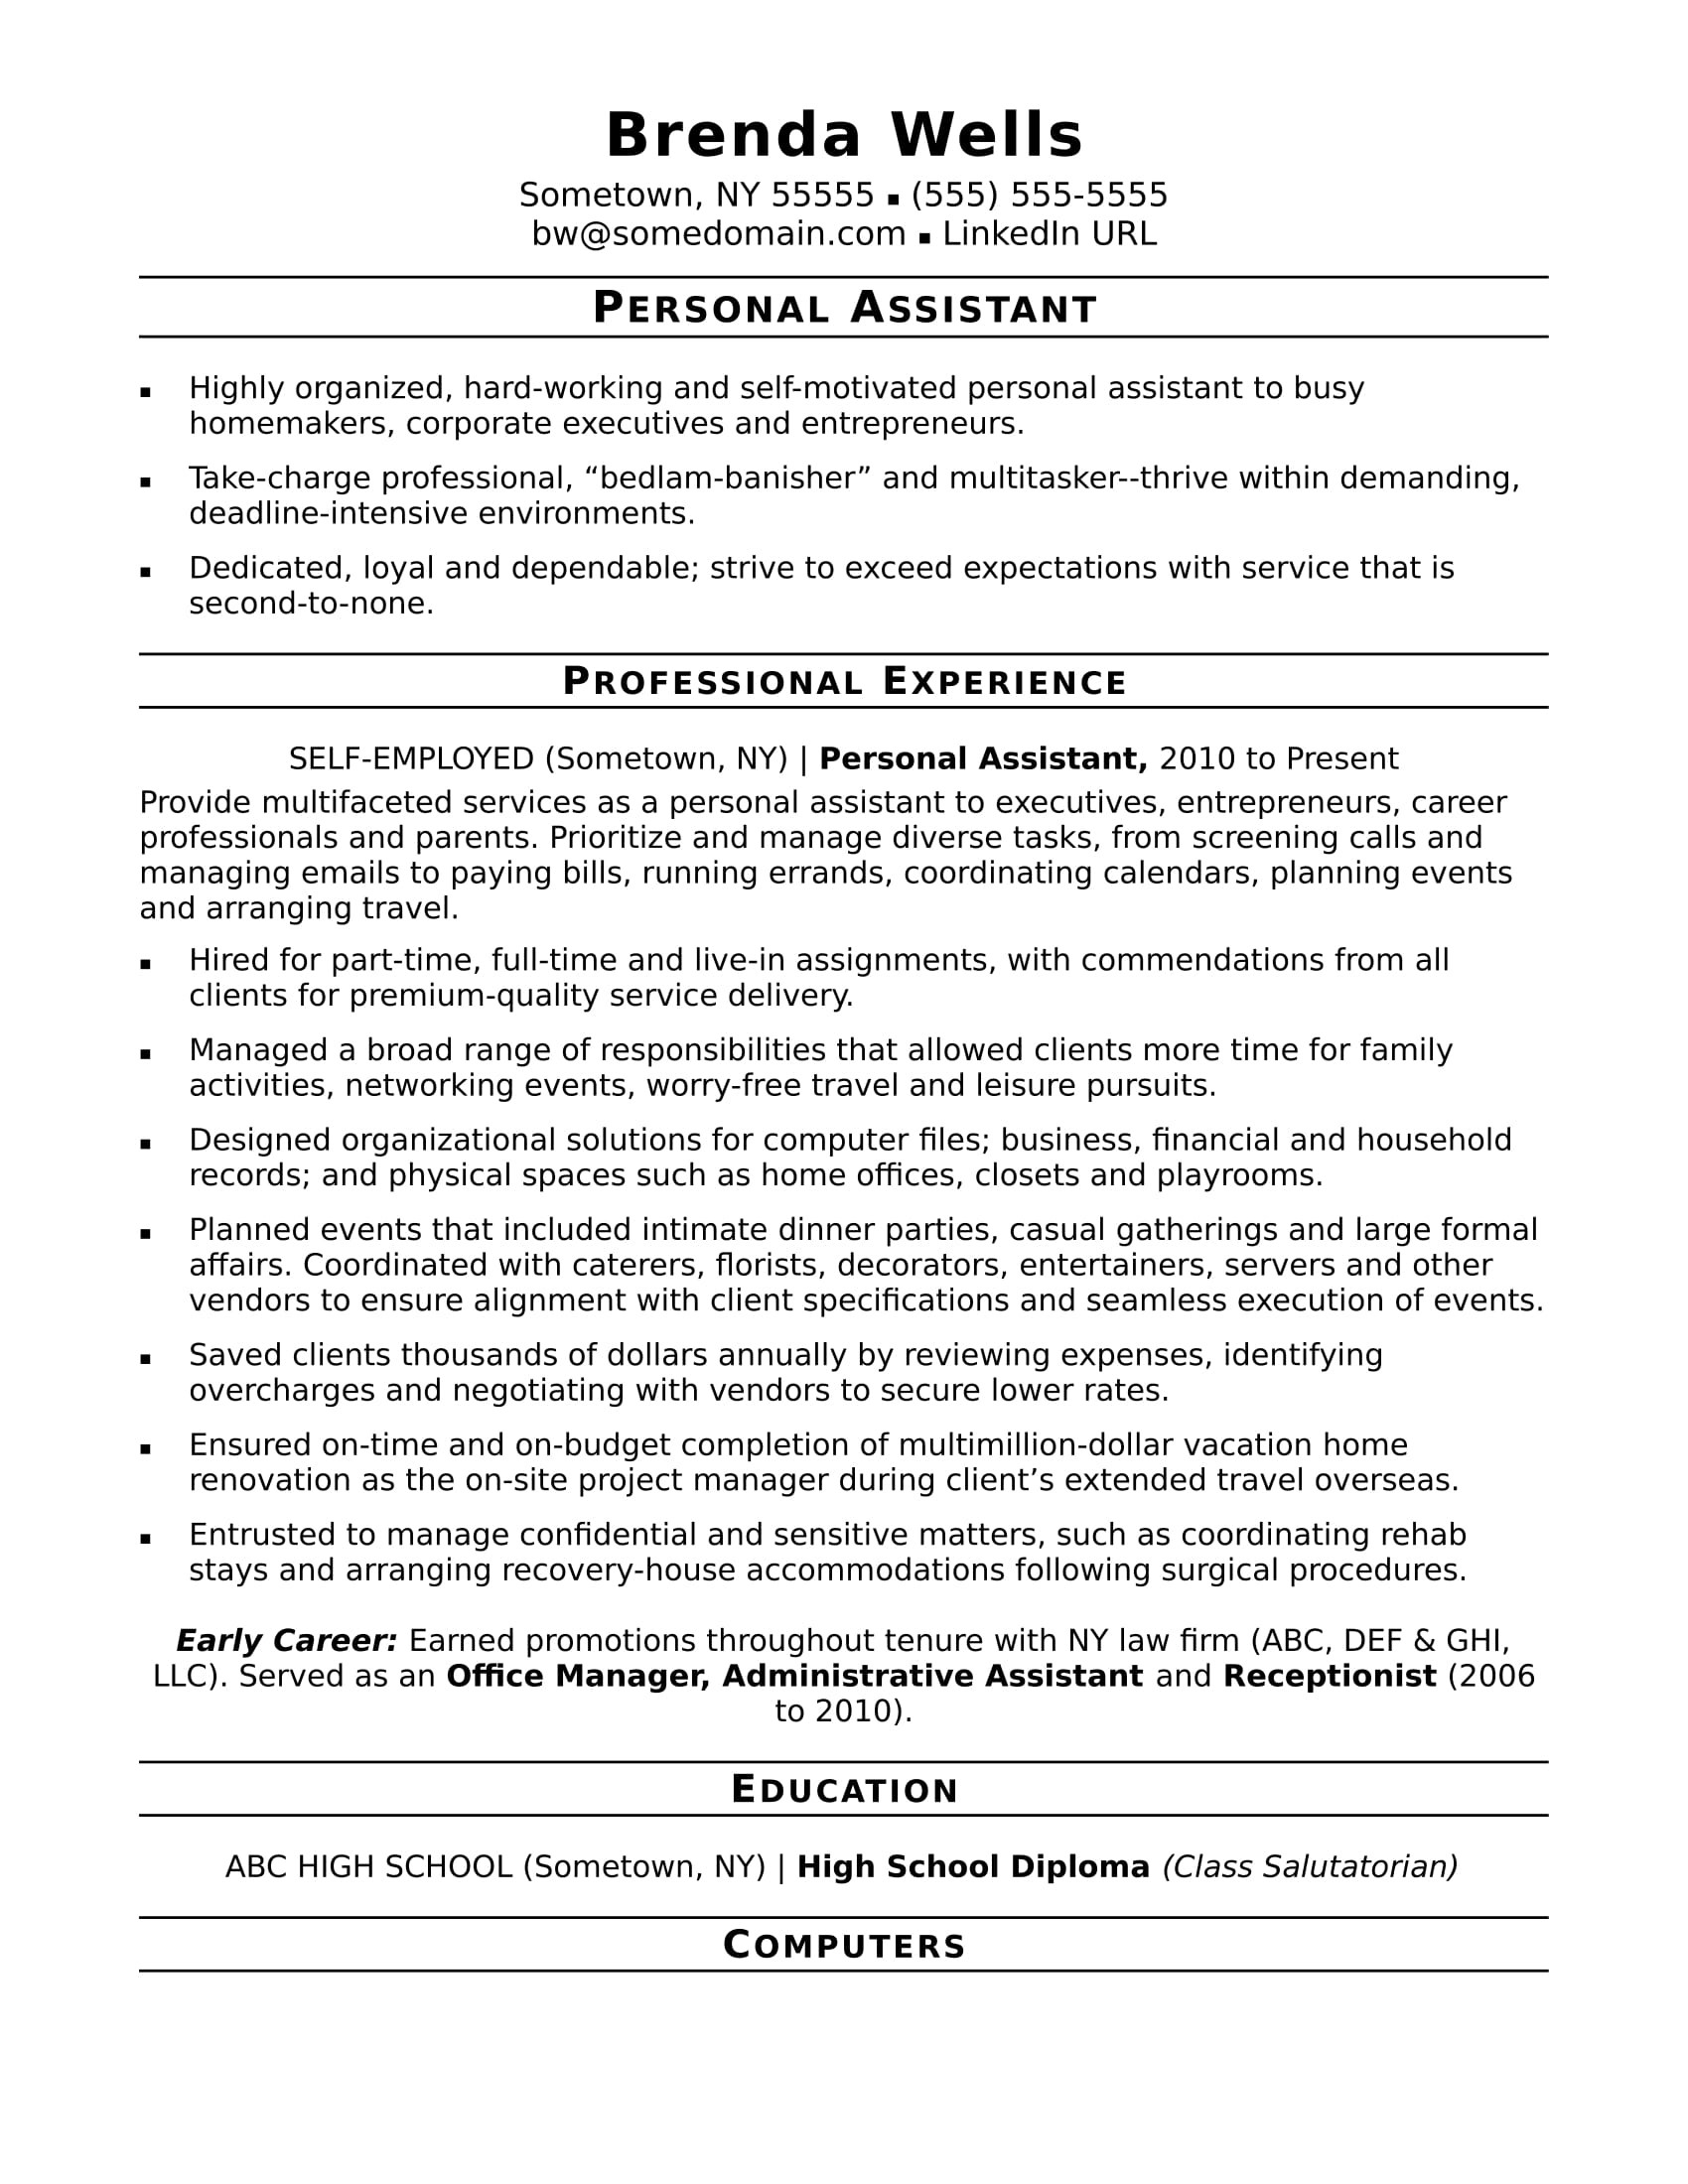 personal assistant resume sample